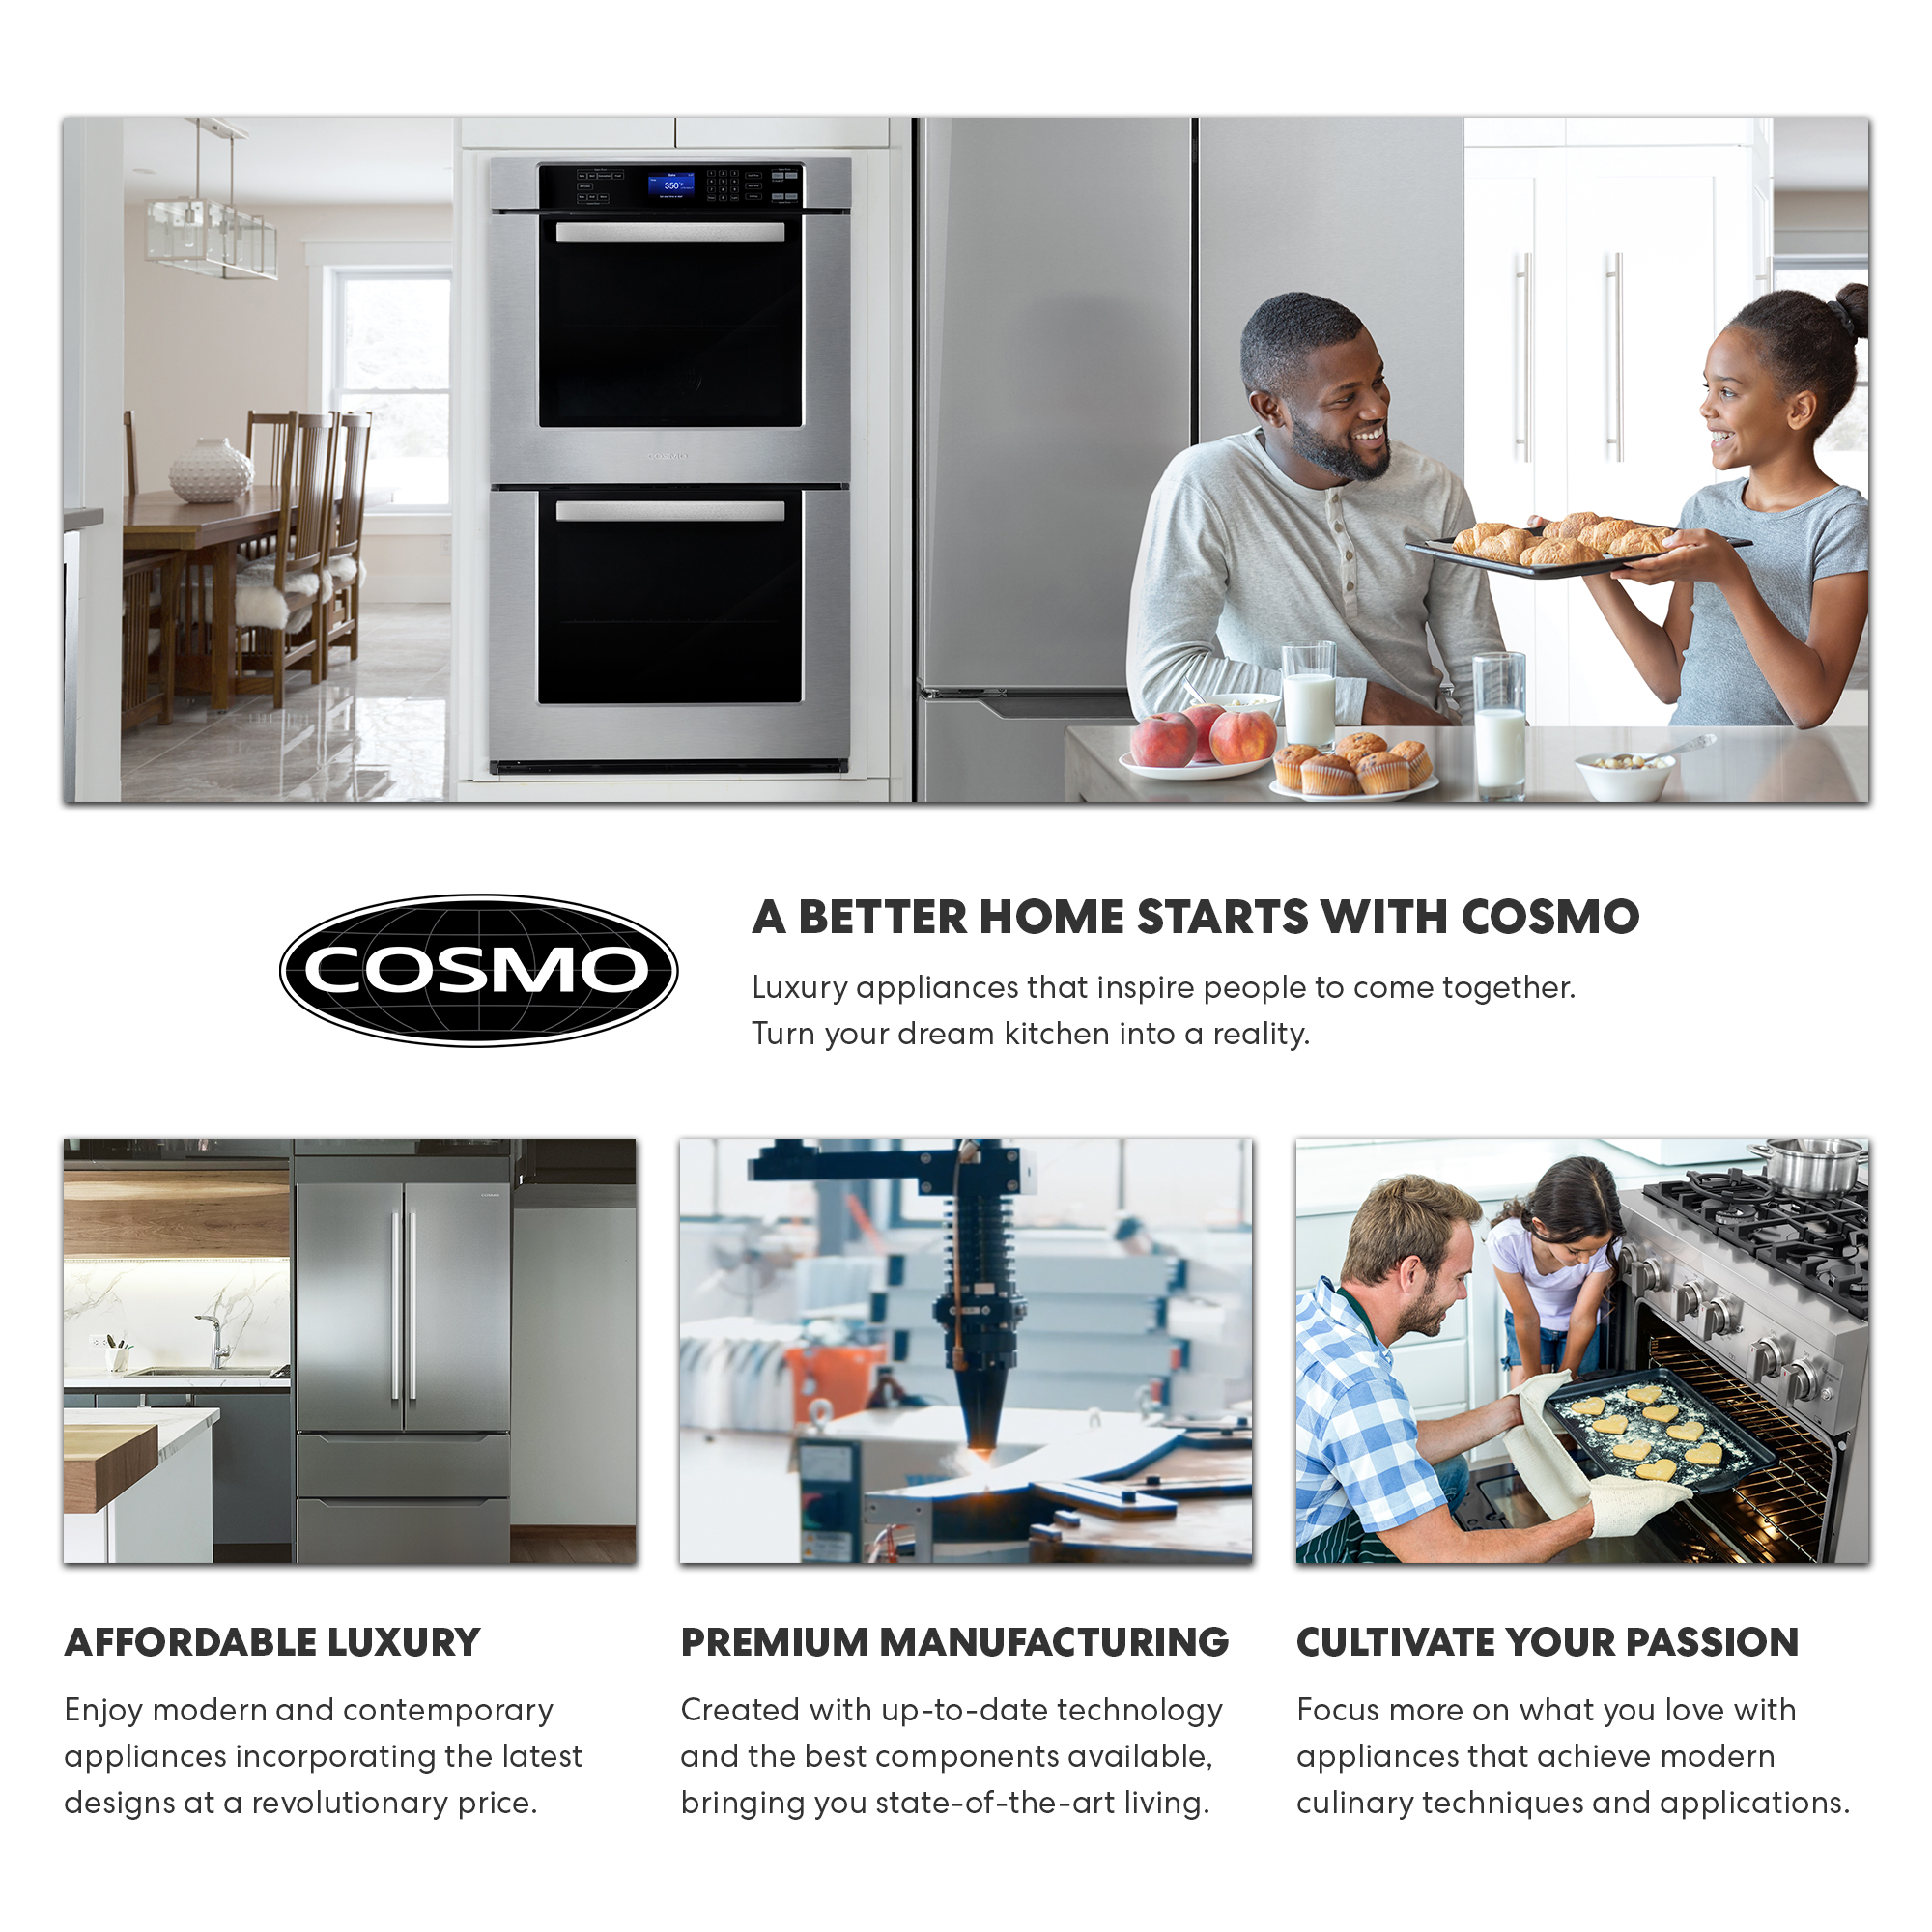 Where are Cosmo appliances made?